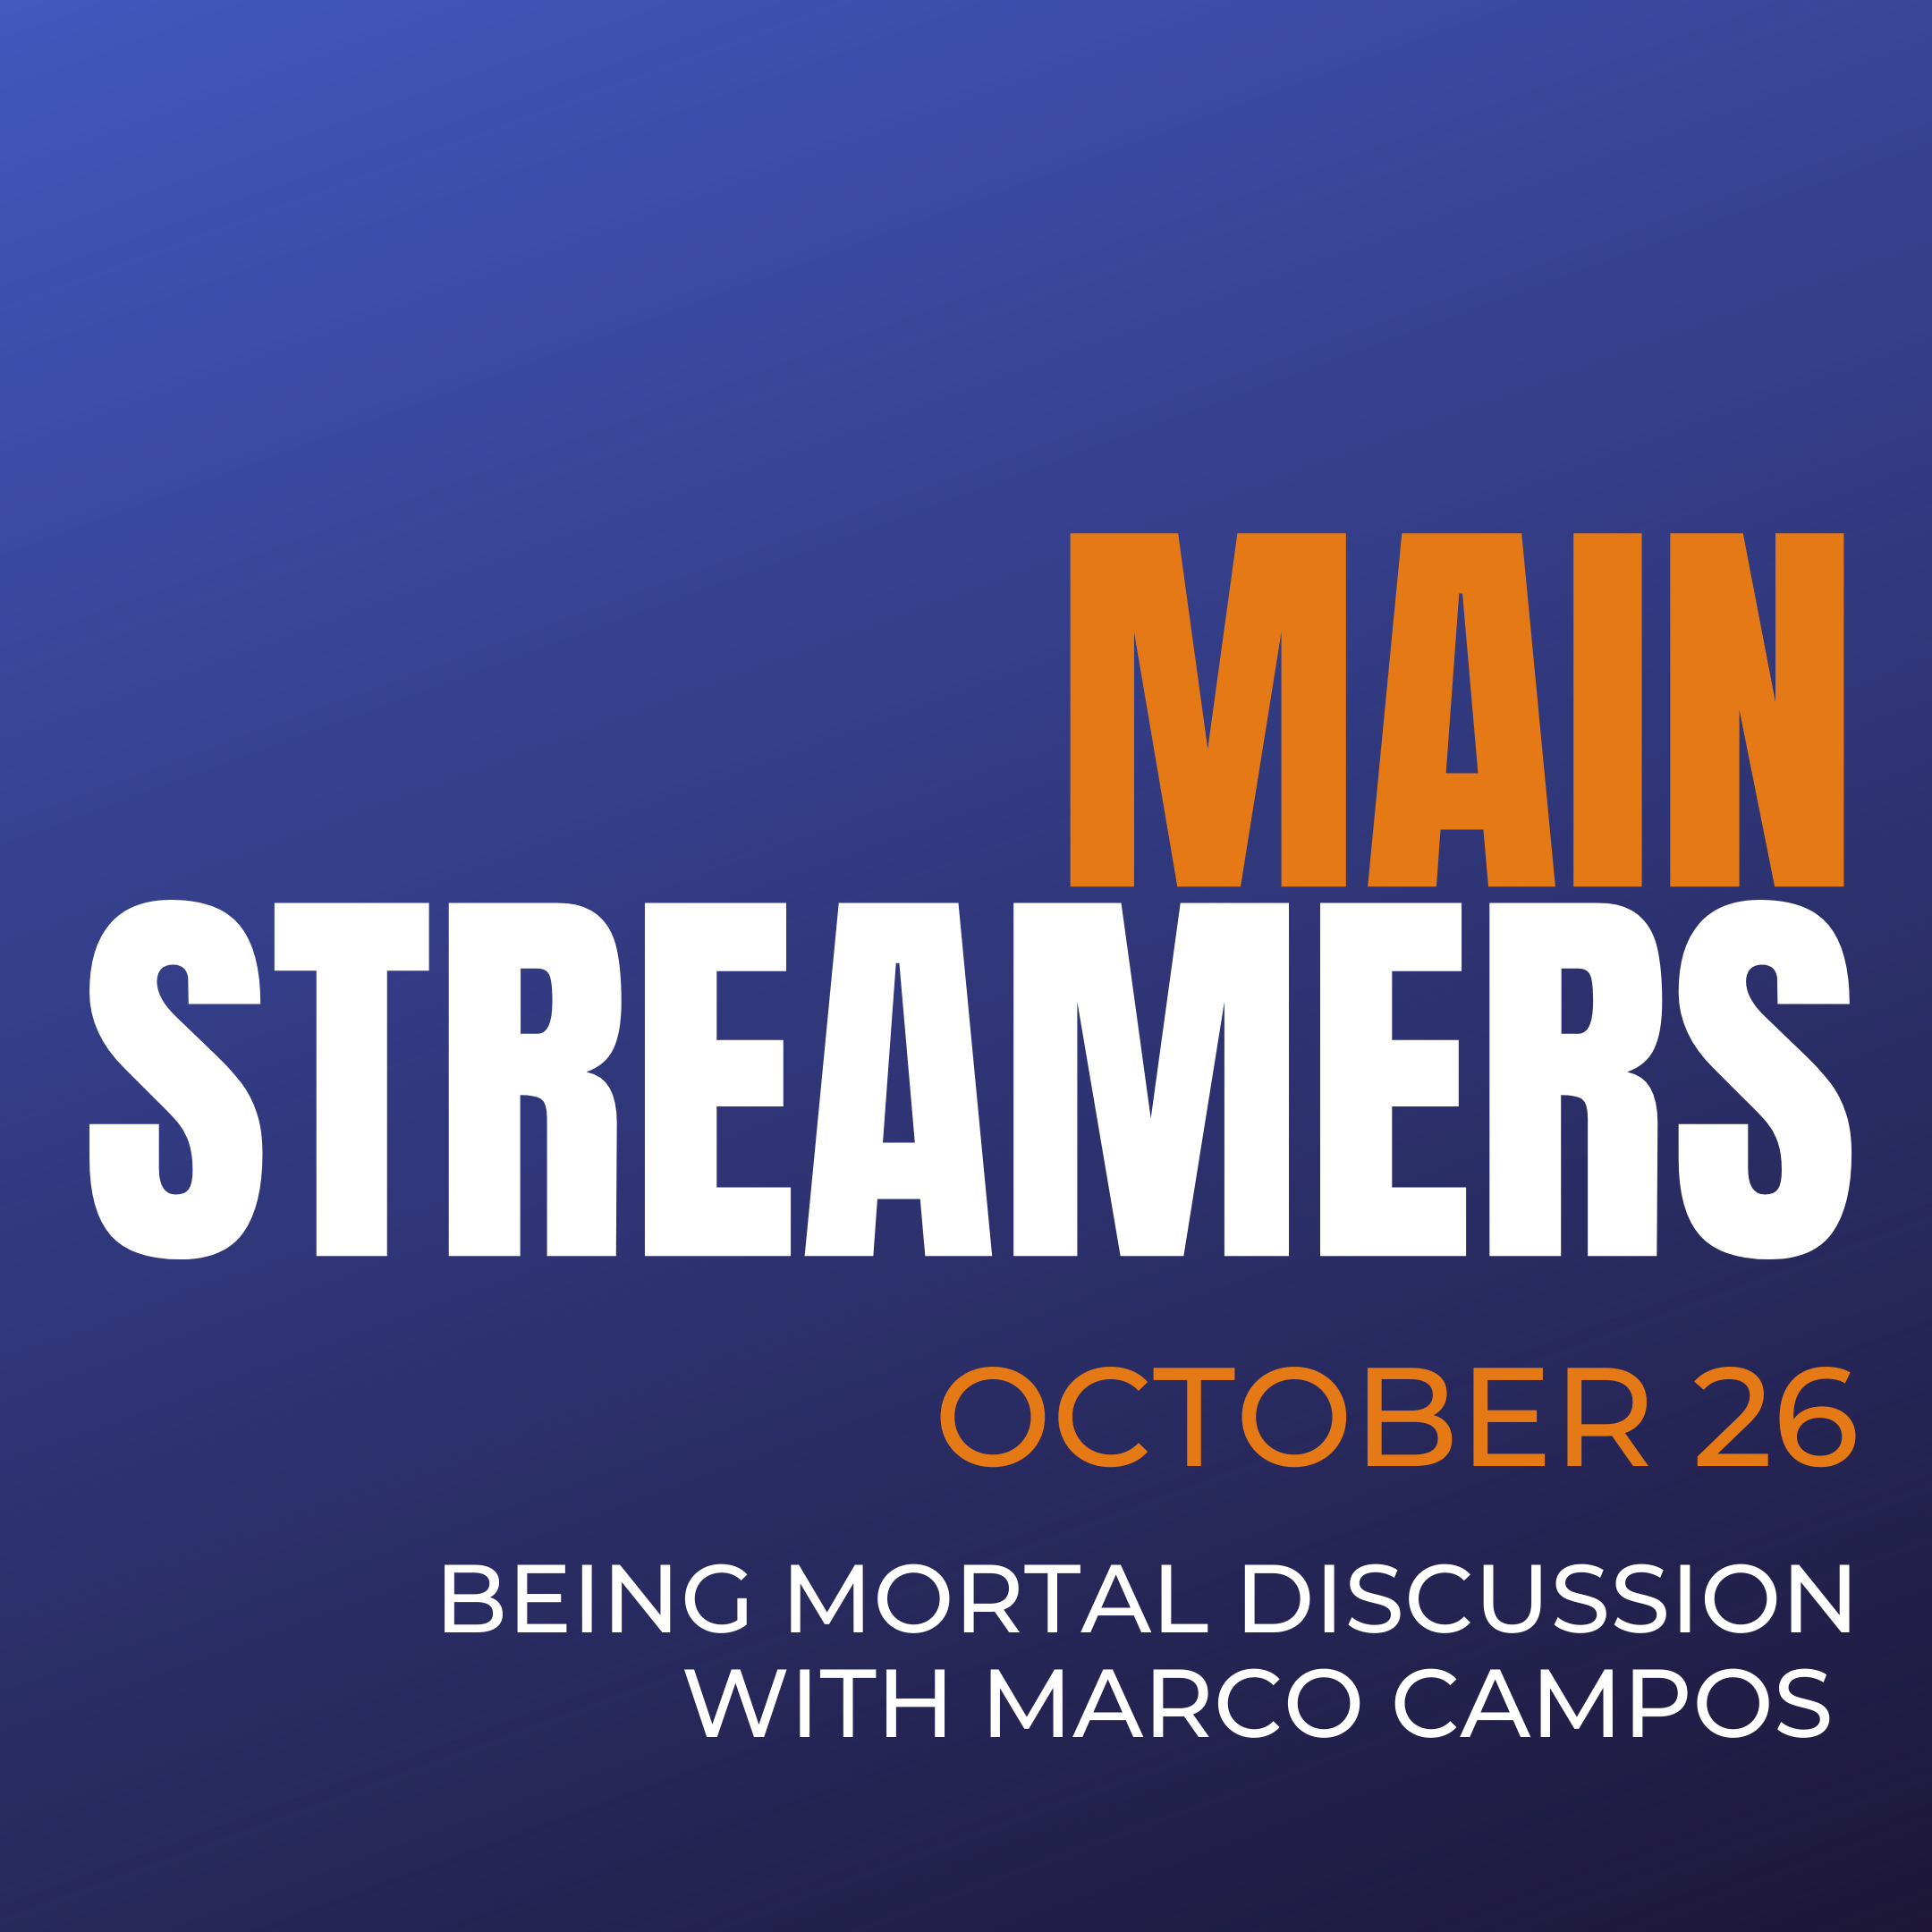 MainStreamers - "Being Mortal" discussion with Marco Campos